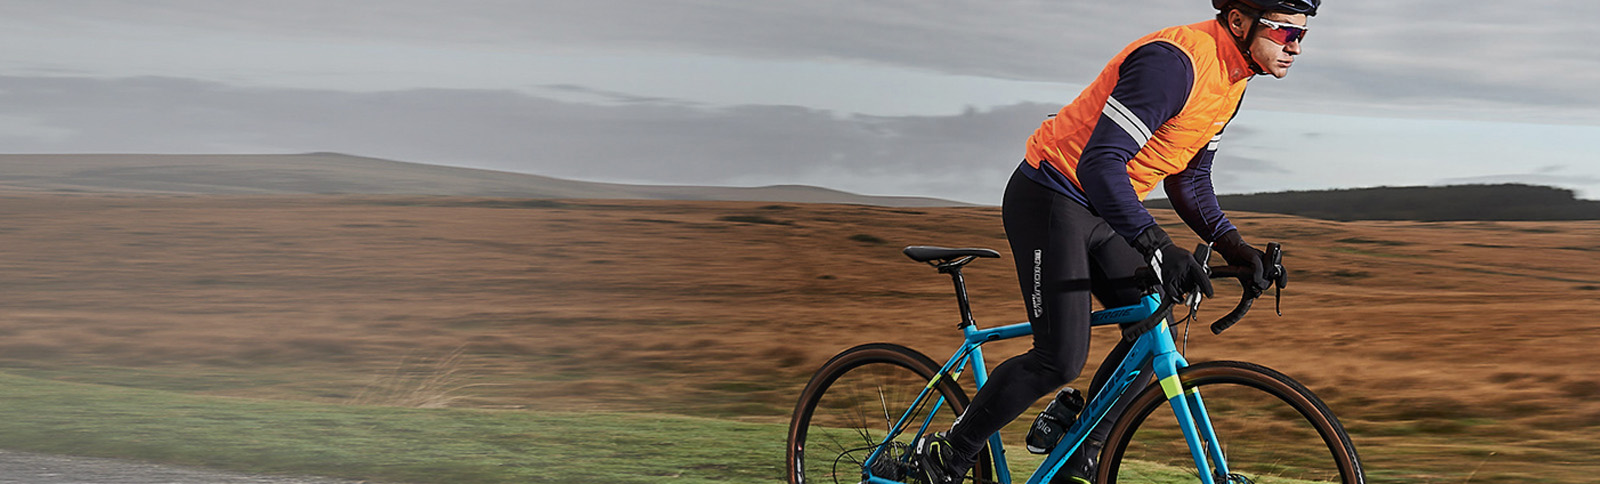 best cycling clothing brands